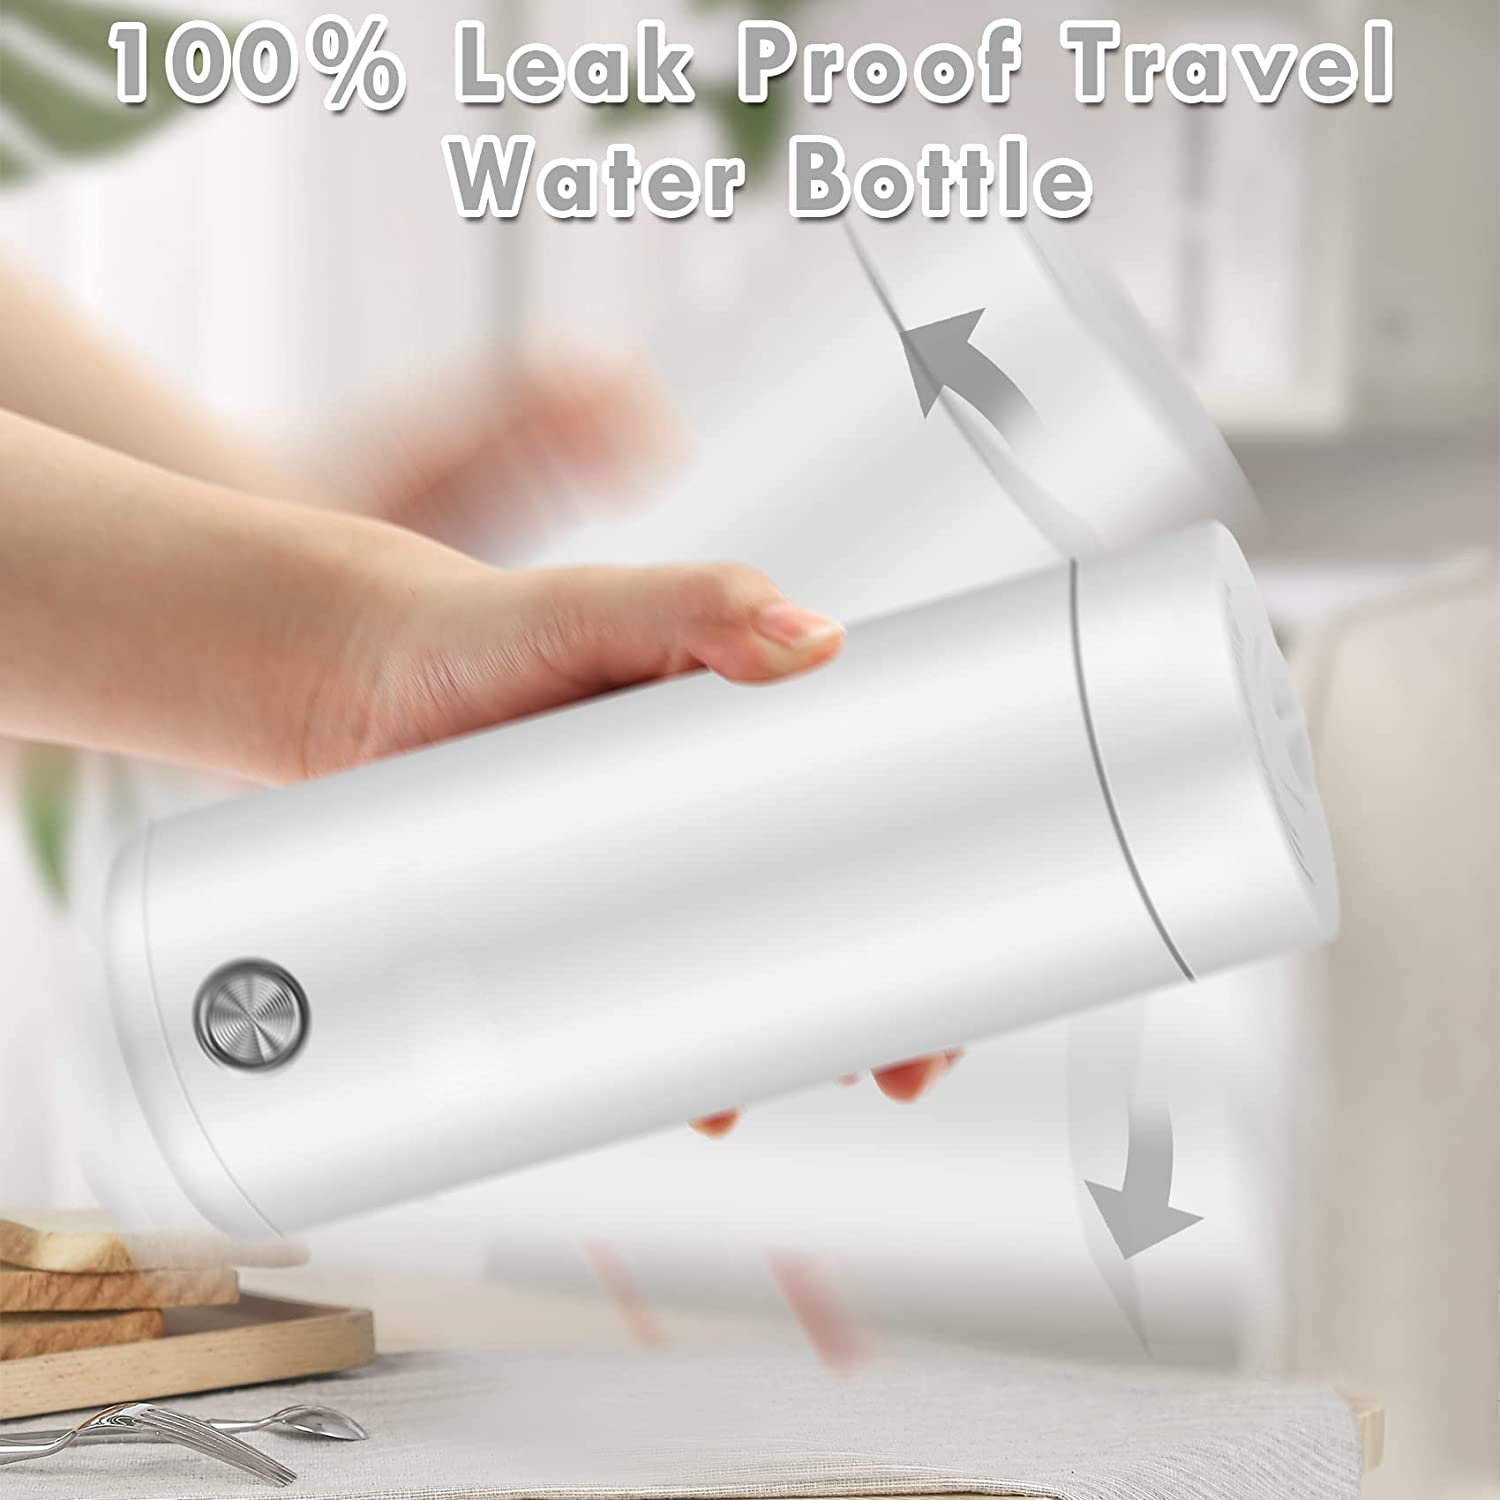 Portable Electric Kettle, 400ml Travel Tea Kettle with Non-stick Coating,Double Wall Water Boiler Bottle,Insulated Coffee Thermos Mug, Fast Boil and Auto Shut Off Hot Water Heater (White) - image 3 of 8